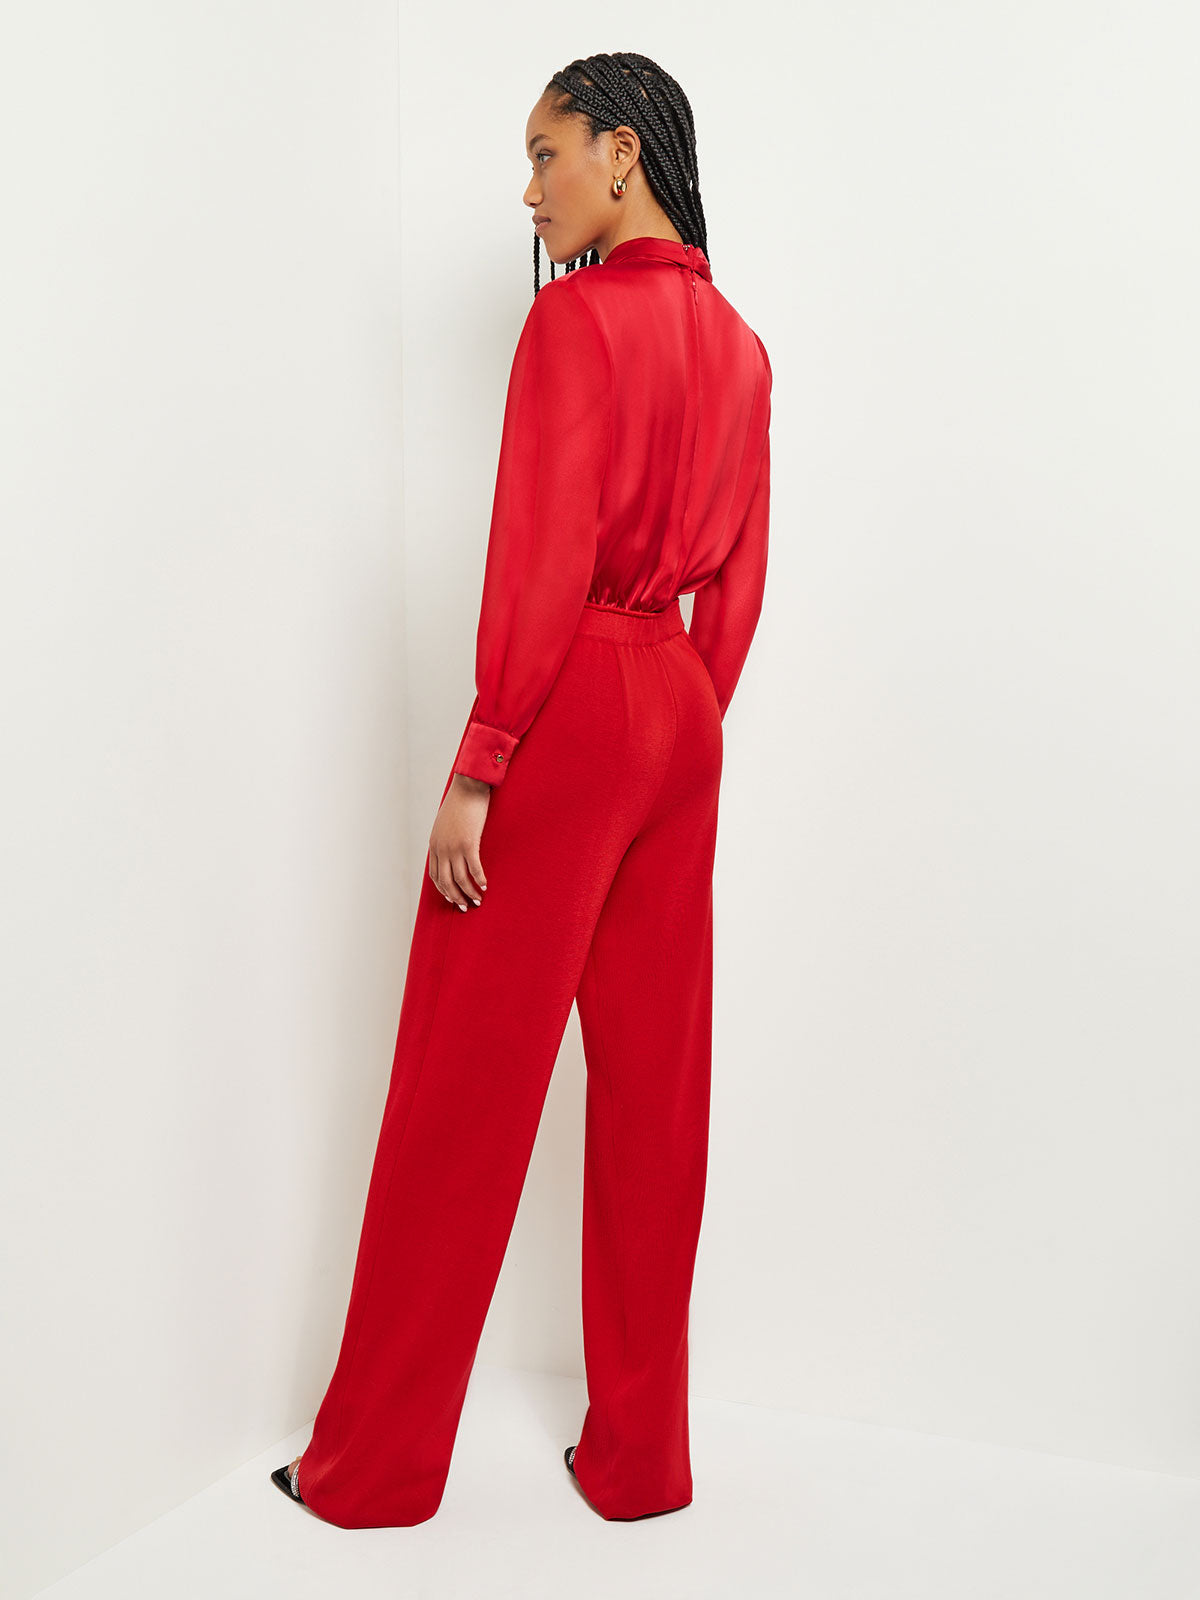 ZARA Red Open Back Fancy Cropped Jumpsuit Dress Red Overalls